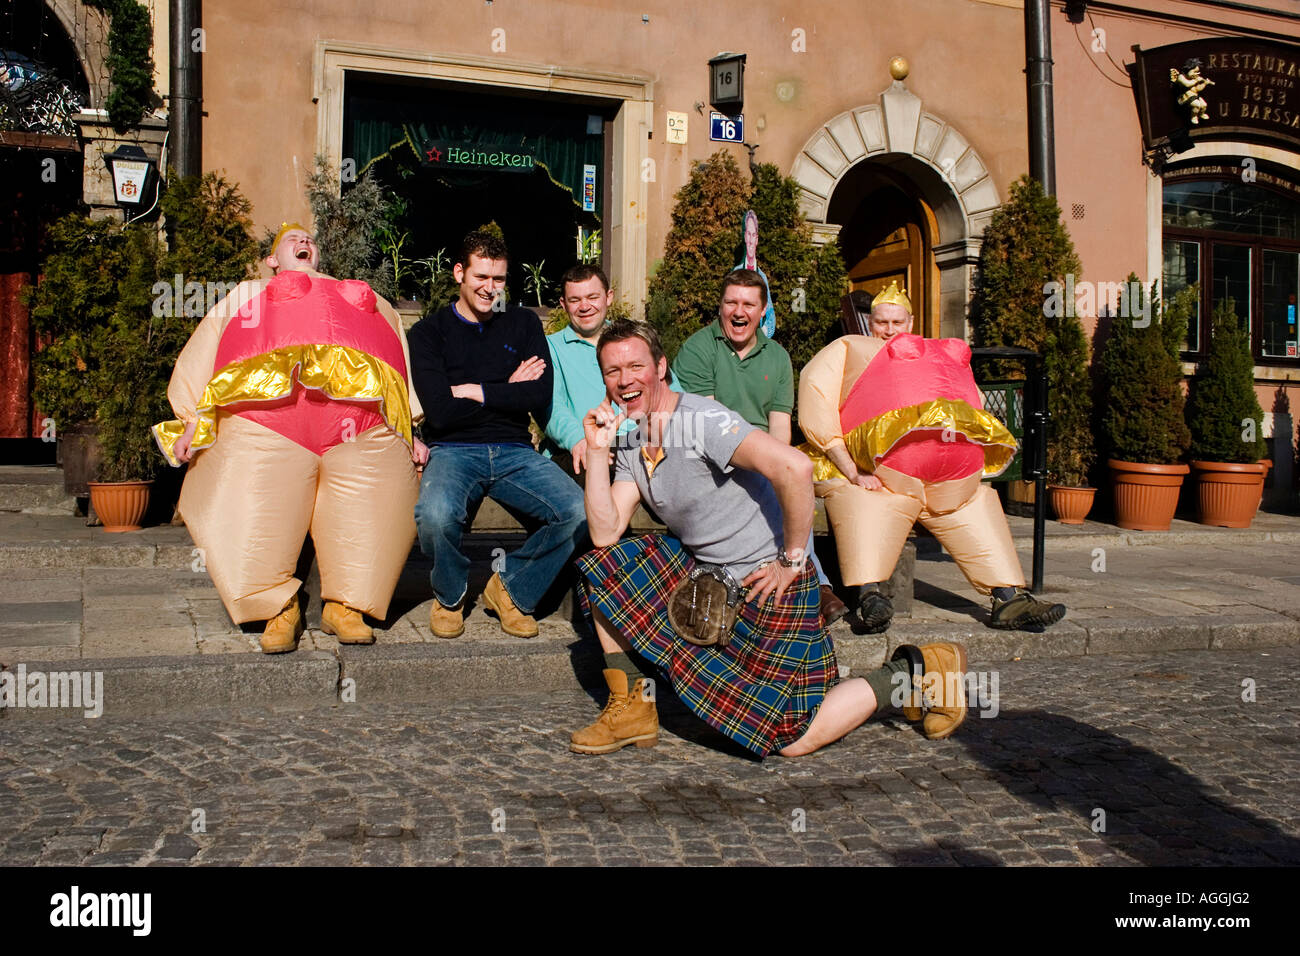 Group of men from the UK celebrating a Stag weekend in the Old Town Warsaw Stock Photo